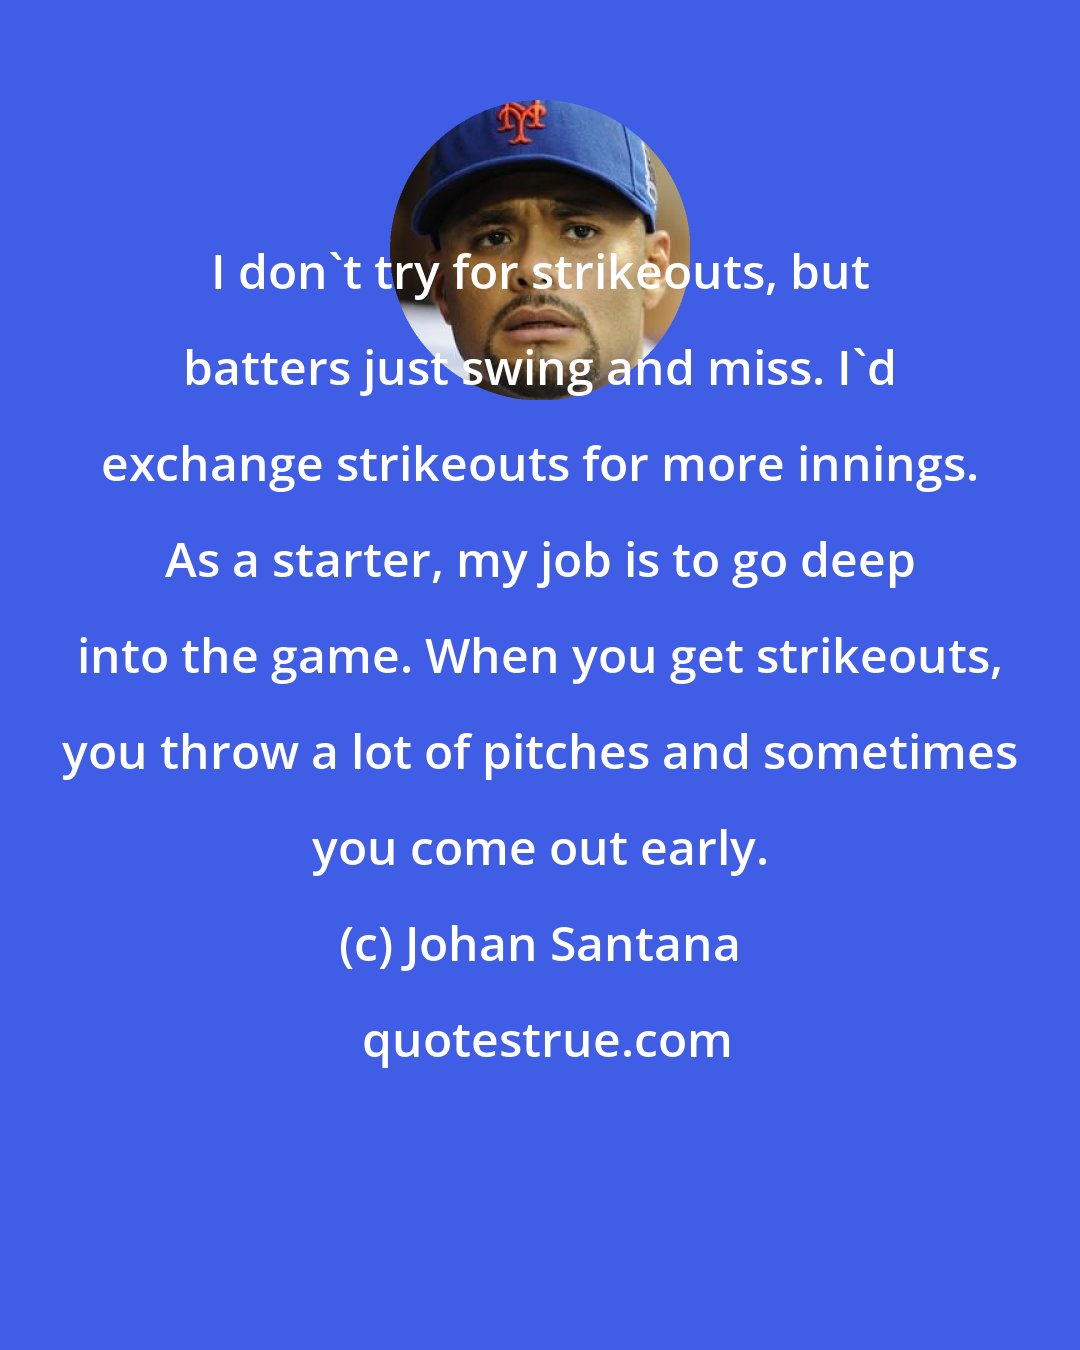 Johan Santana: I don't try for strikeouts, but batters just swing and miss. I'd exchange strikeouts for more innings. As a starter, my job is to go deep into the game. When you get strikeouts, you throw a lot of pitches and sometimes you come out early.